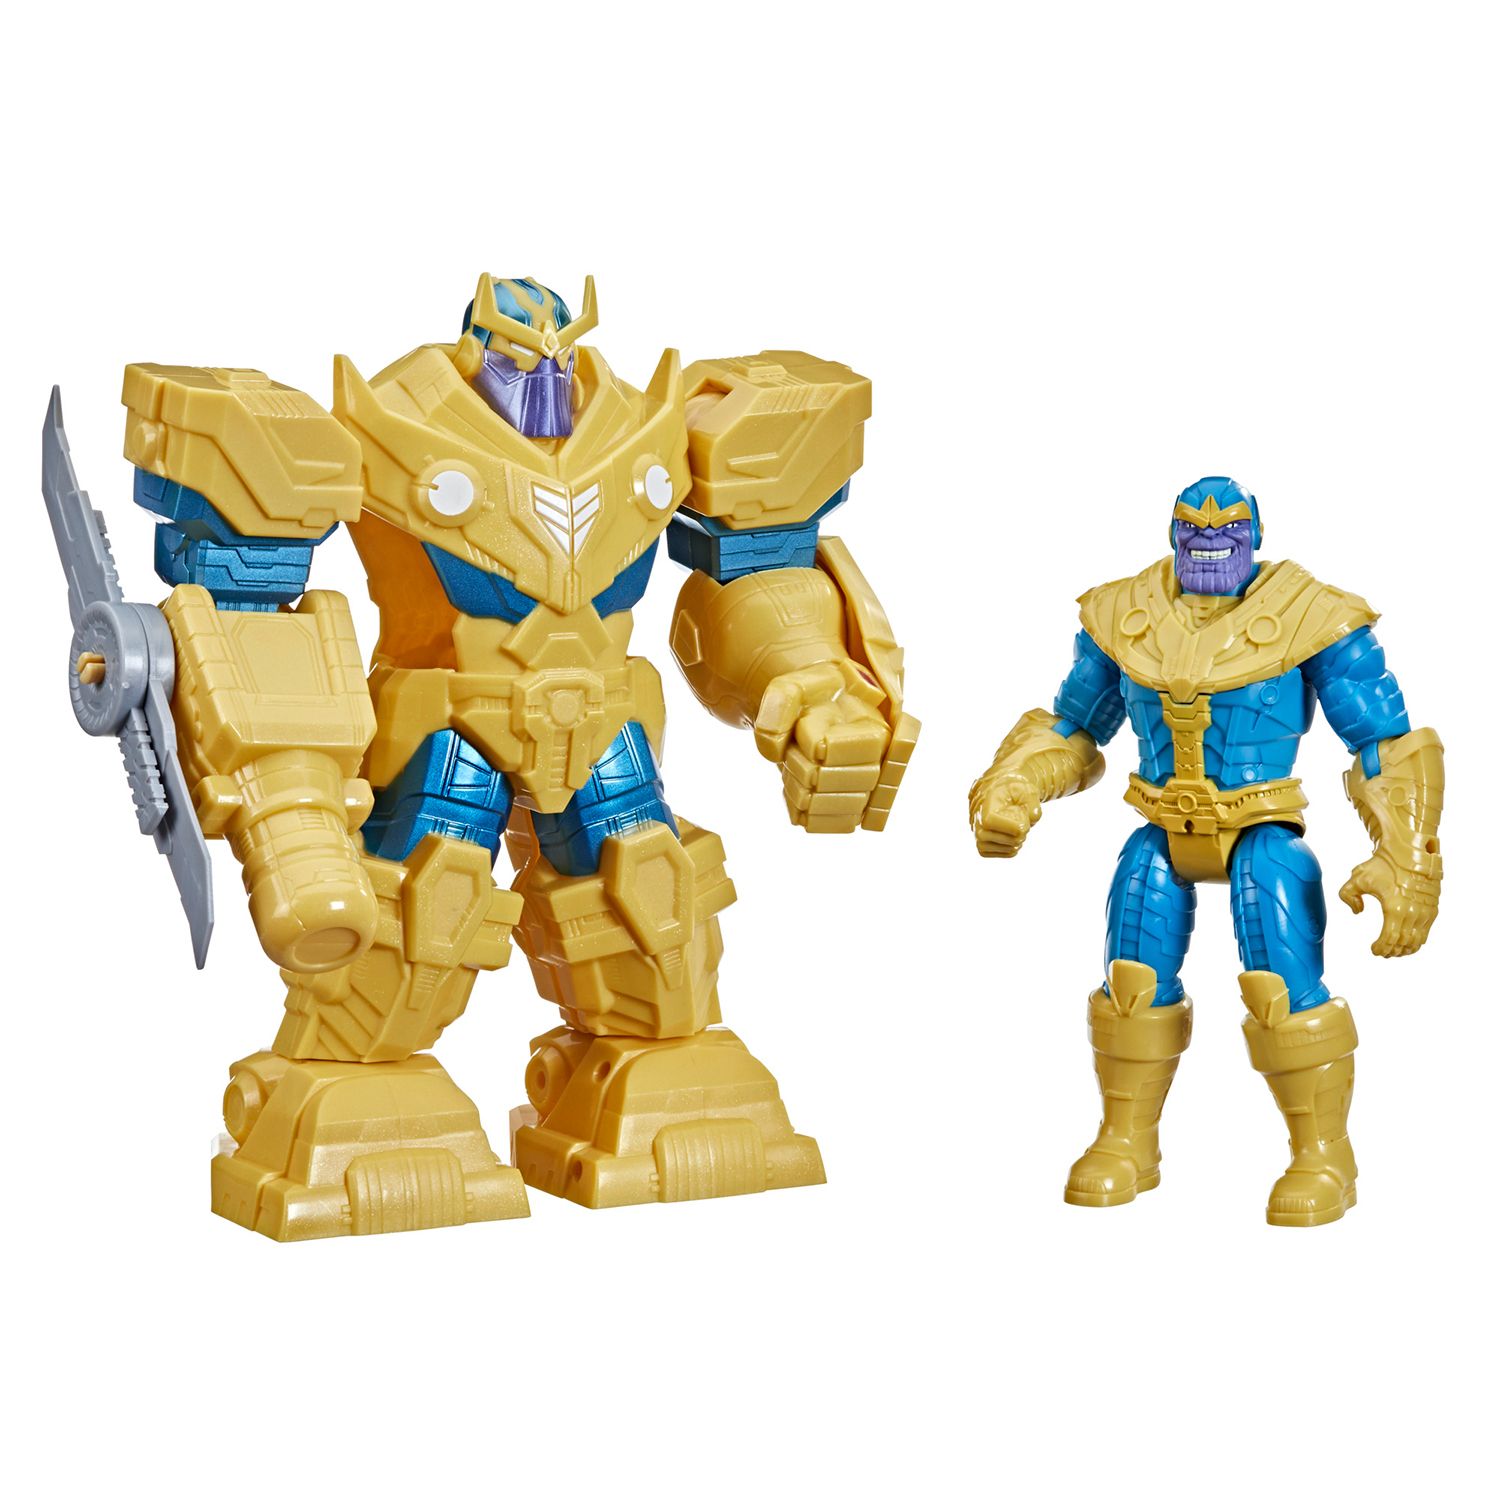 Image for Hasbro Avengers Mech Strike 9-inch Infinity Mech Suit Thanos And Blade Weapon by at Kohl's.